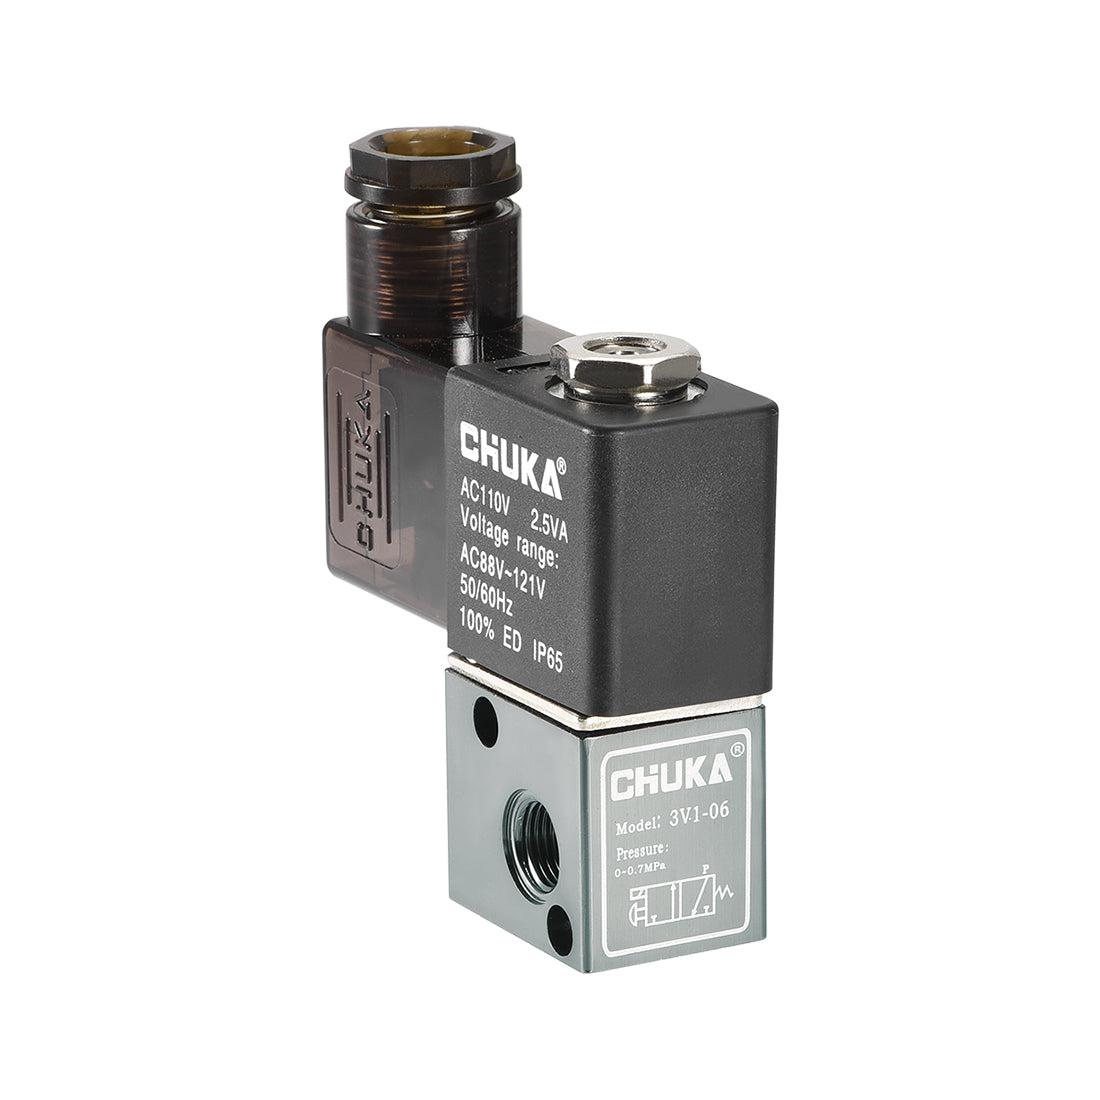 uxcell Uxcell 3V1-06 Air NC Single Electrical Control Solenoid Valve AC 110V 3 Way 2 Position 1/8" PT Internally Piloted Acting Type w Counter Sunk Hex Plug